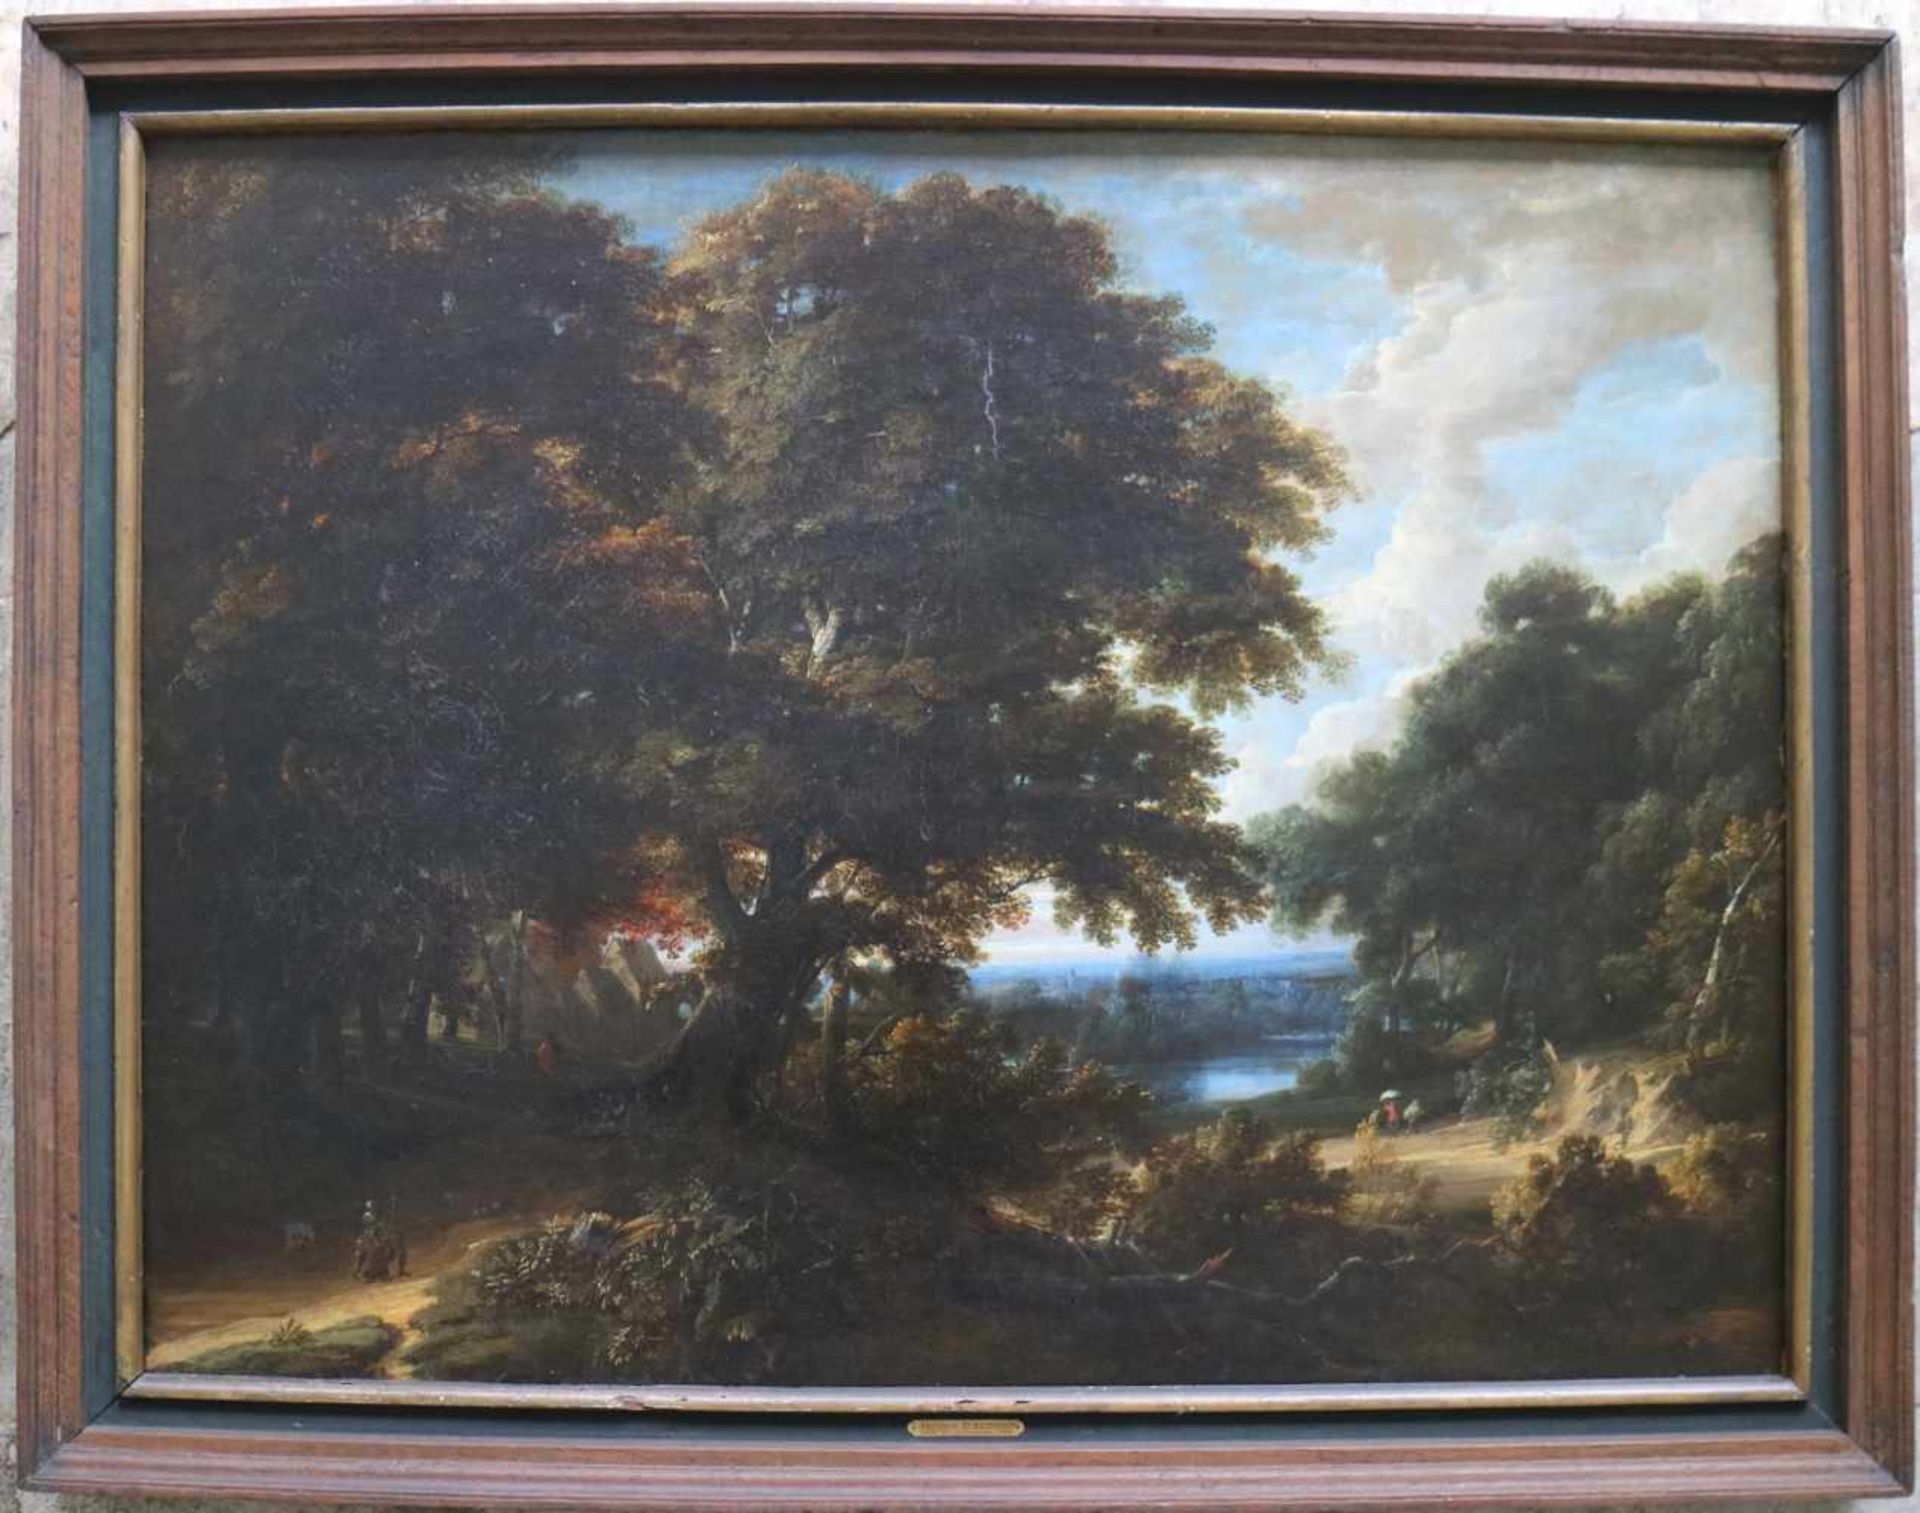 Jacques D'ARTHOIS (1613-1686) oil on canvas Landscape with trees and river 122 x 95 cm - Image 2 of 6